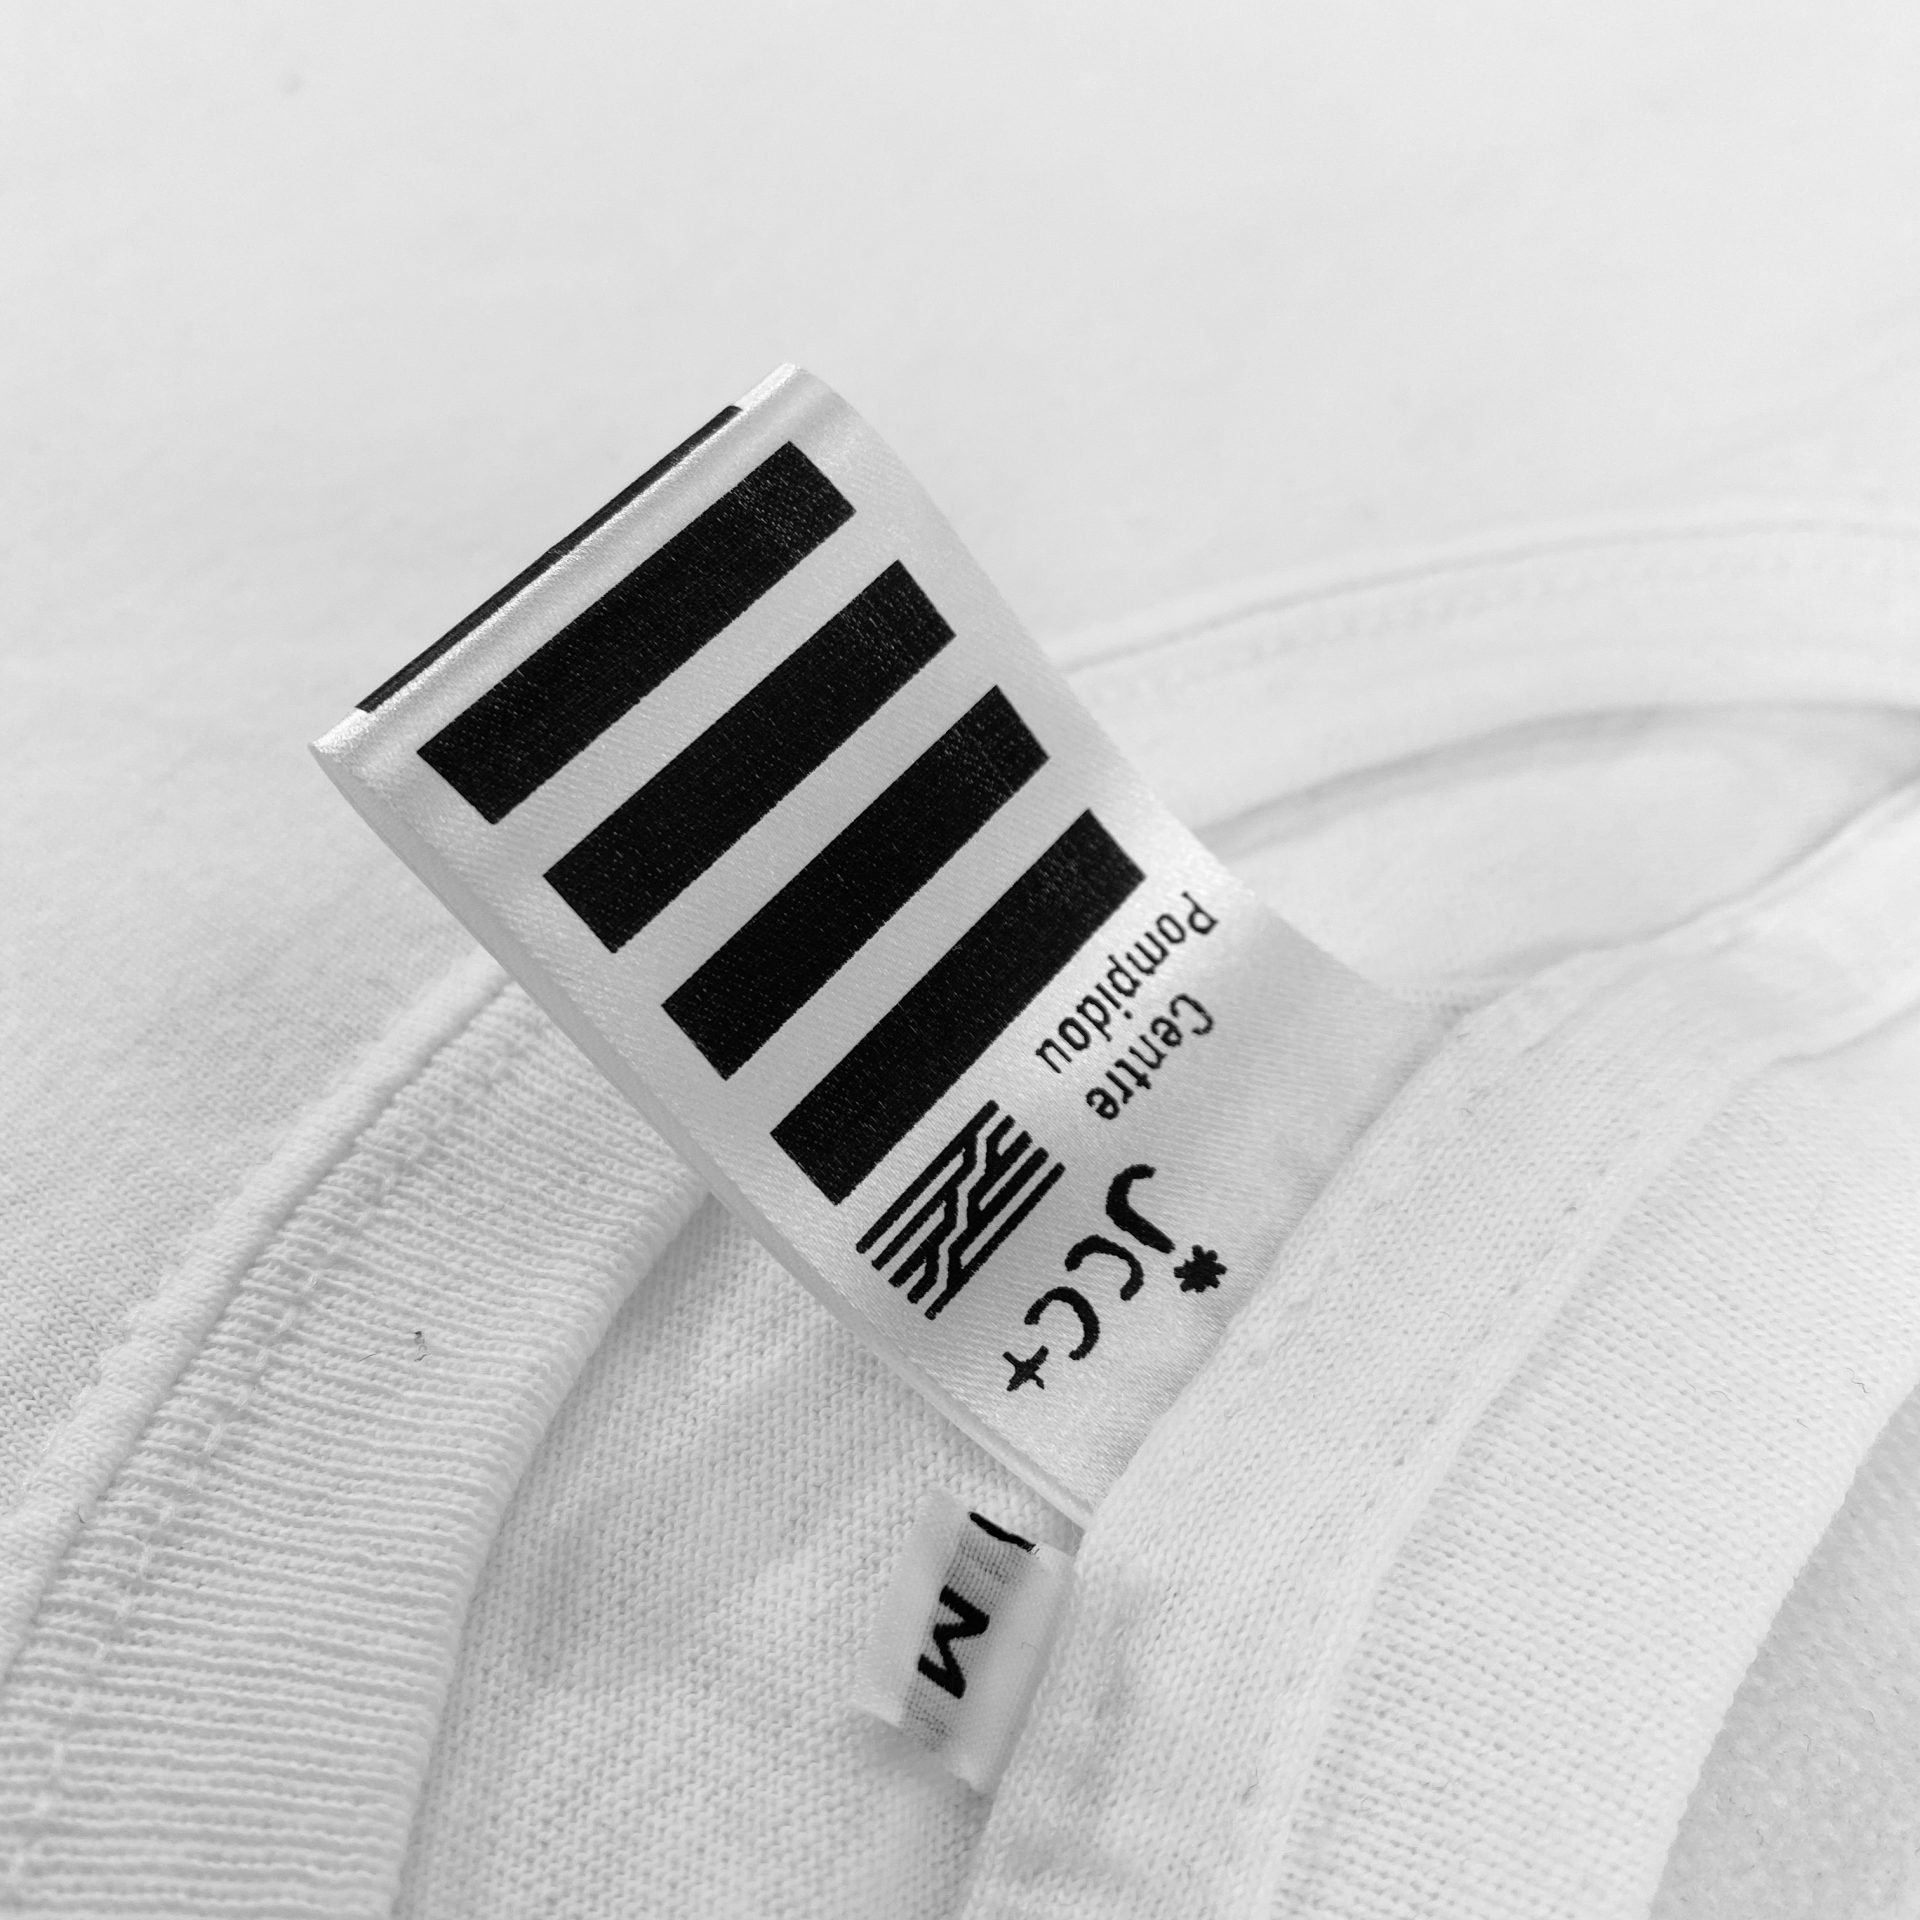 Printed, branded labels in t-shirts